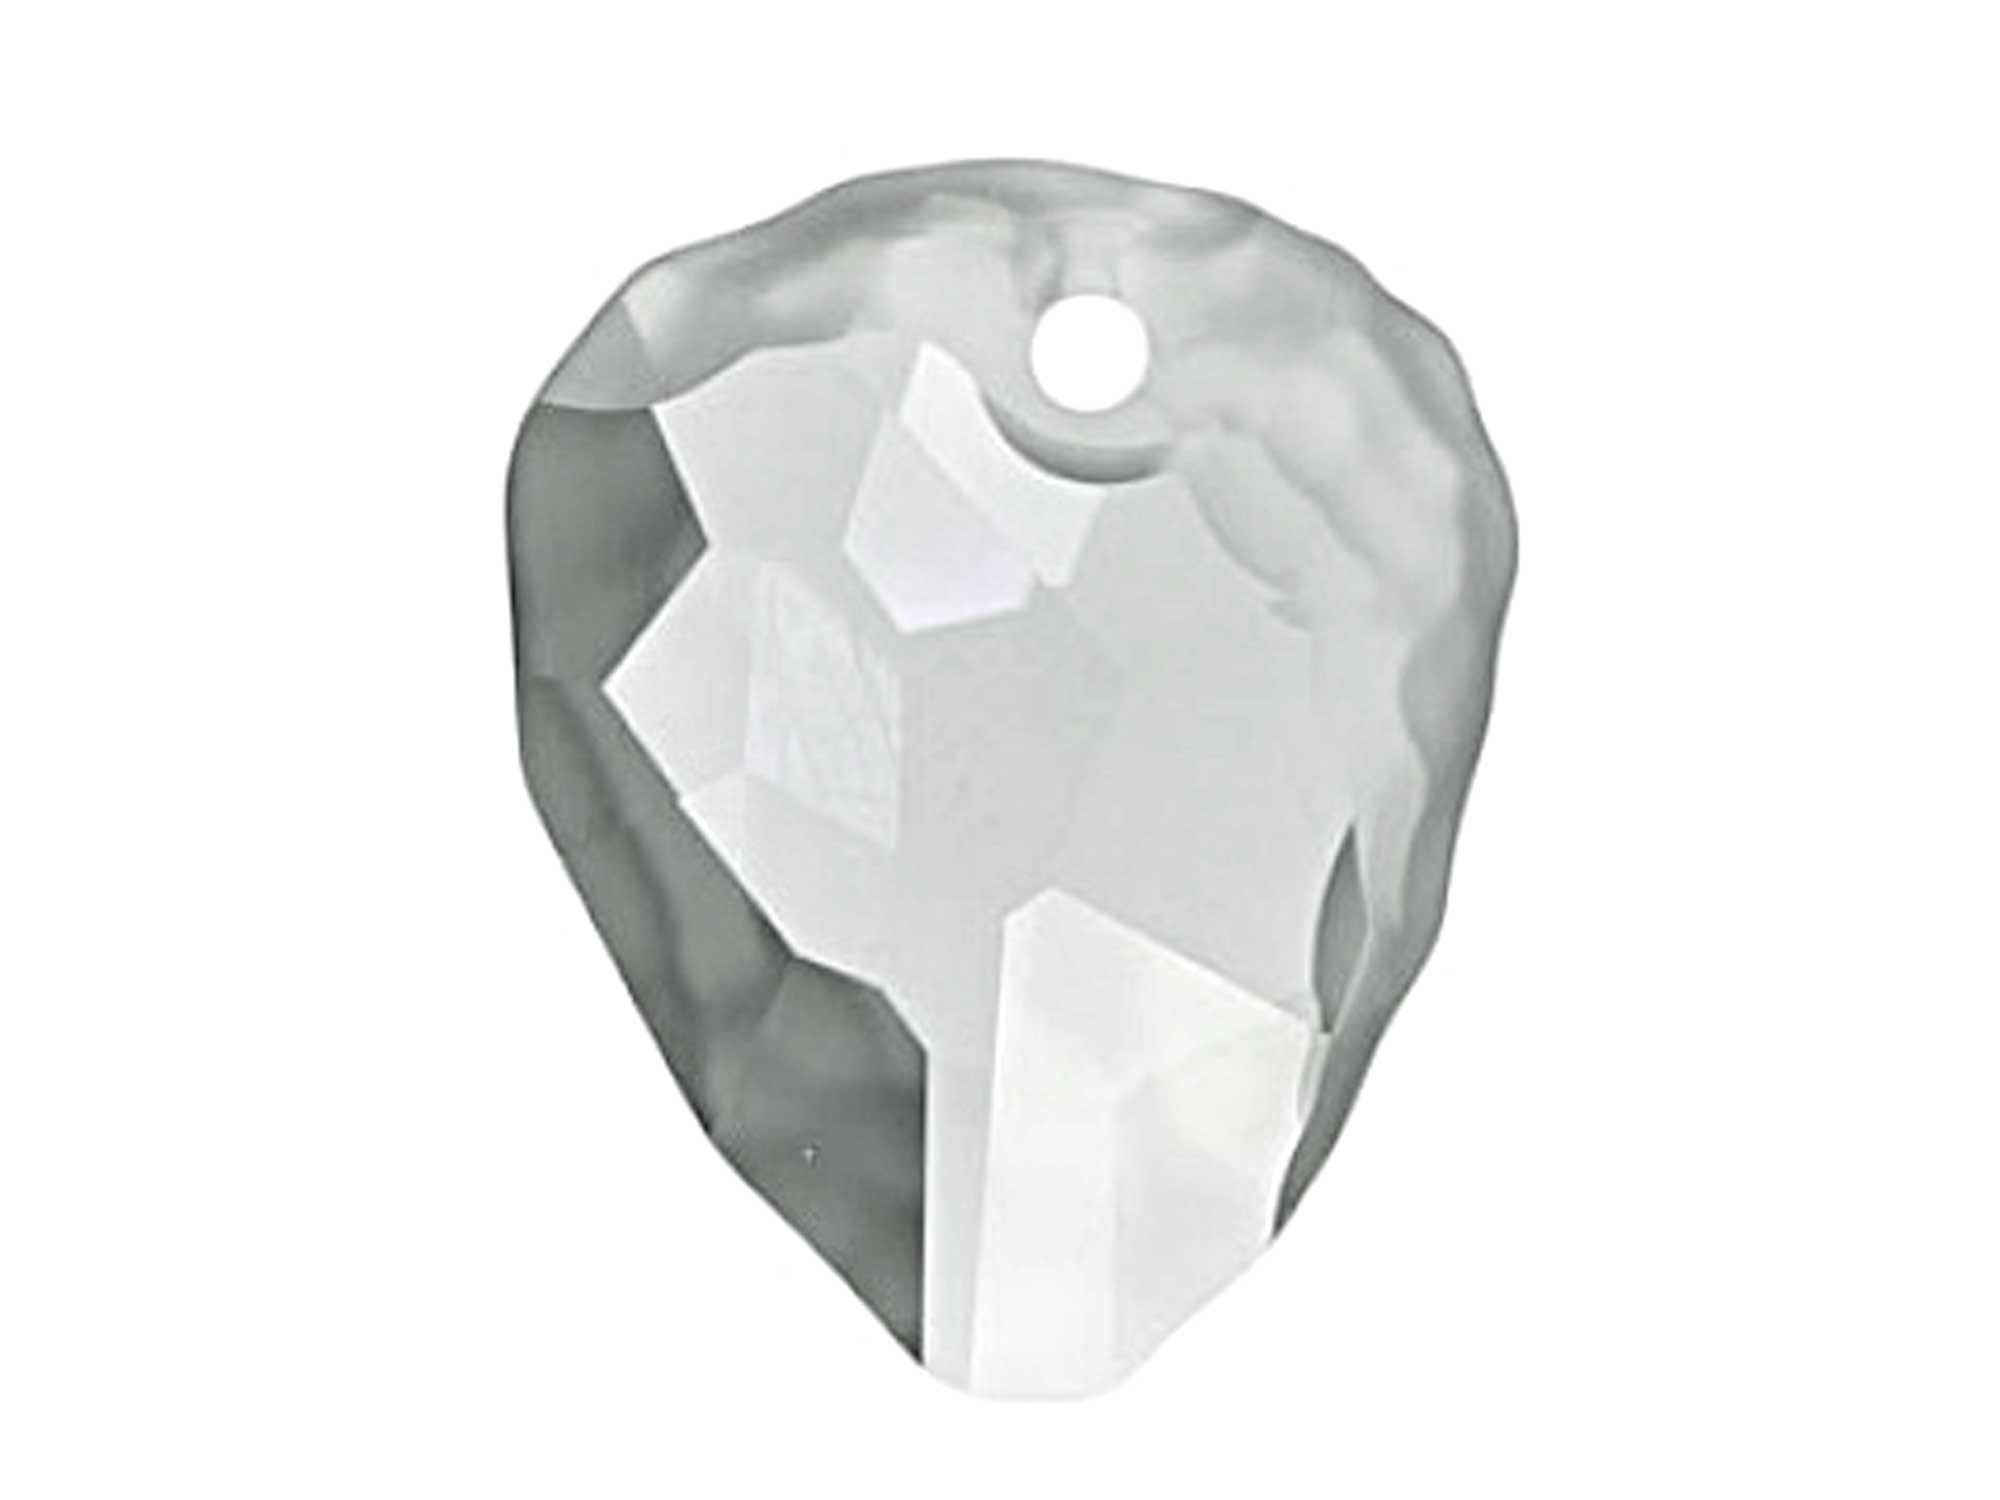 Swarovski Art.# 6190 - Rock Pendants 35mm Crystal Silver Shade coated and Partially Matted